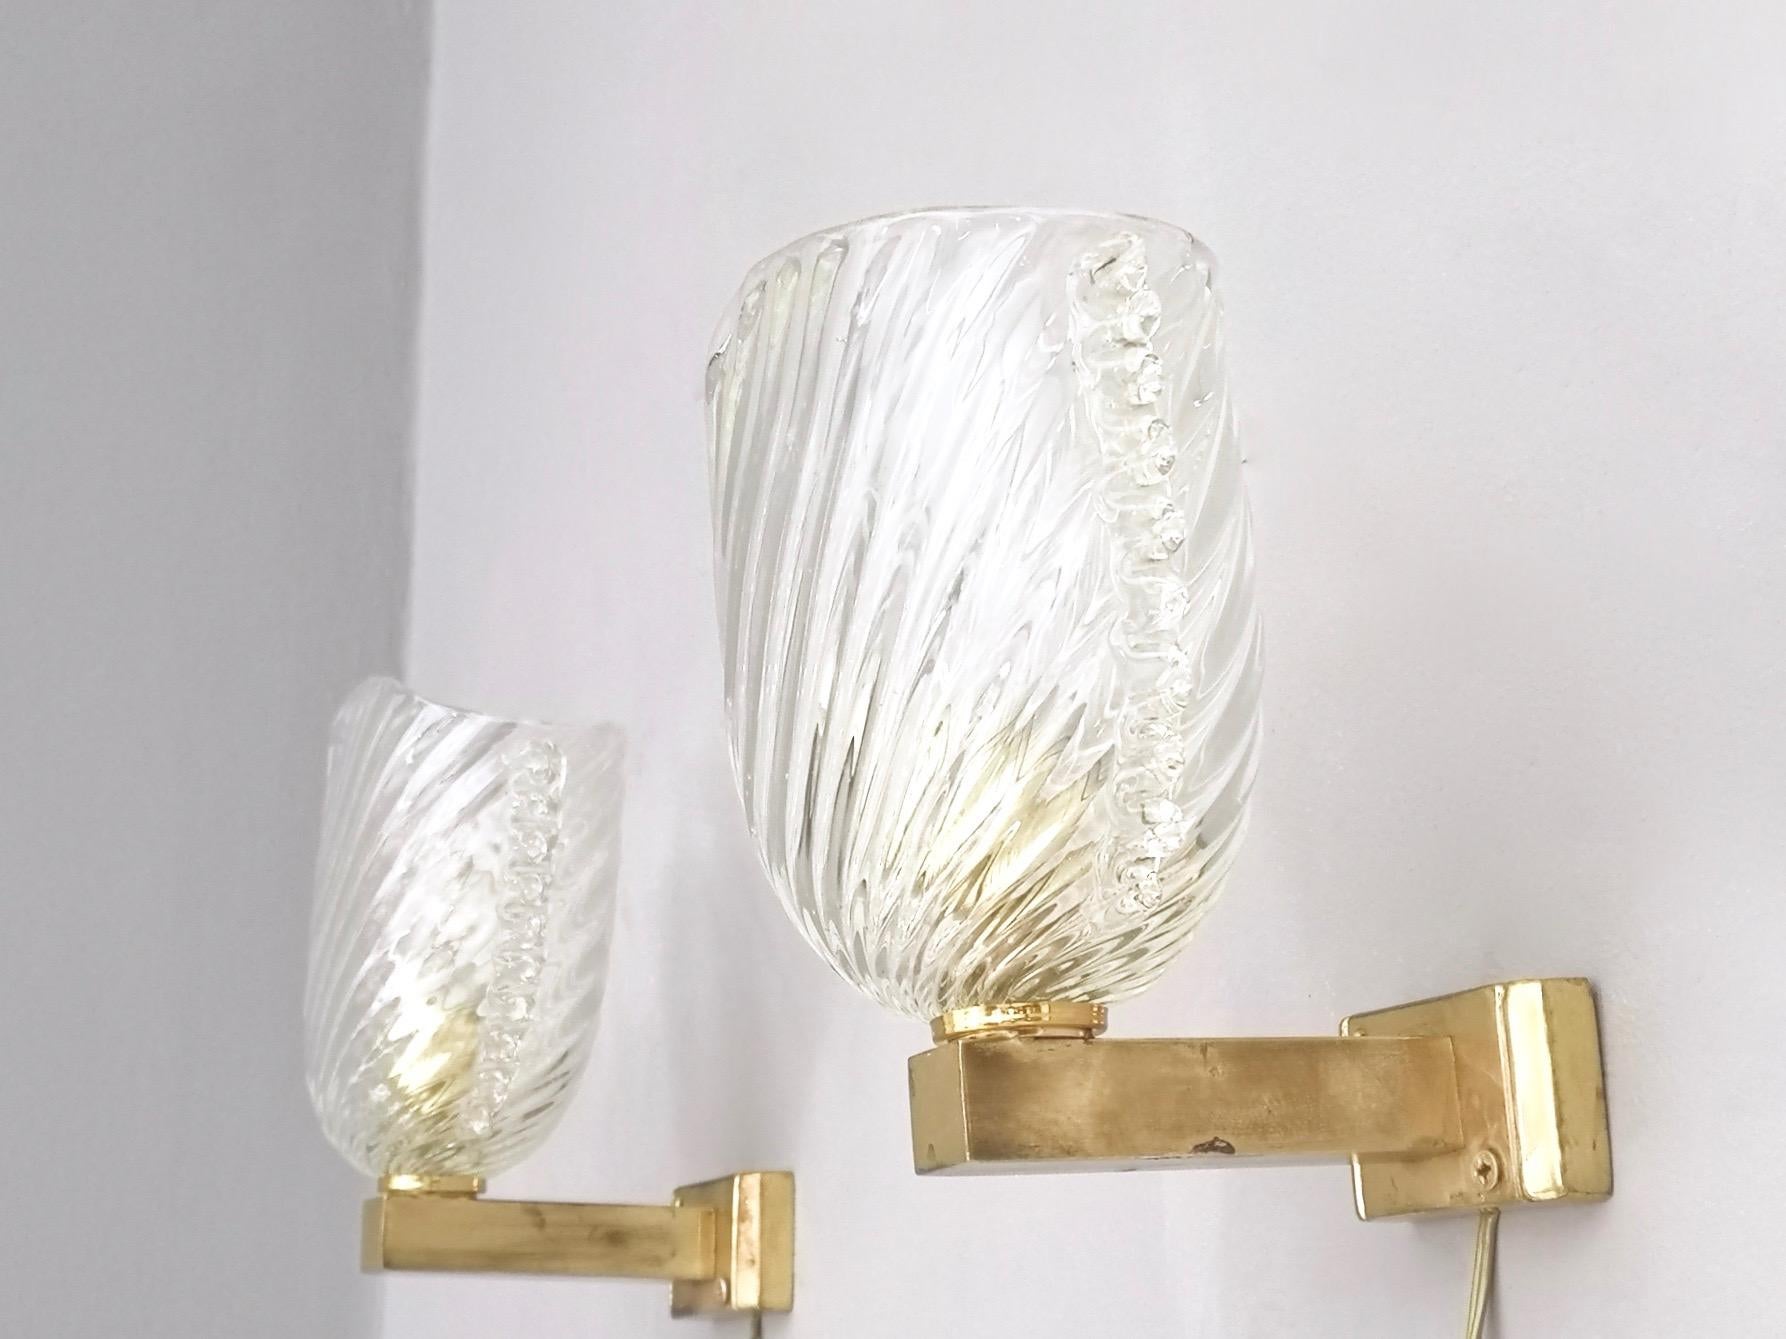 Italian Pair of Elegant Murano Glass and Brass Wall Lights by Seguso, Italy, 1940s